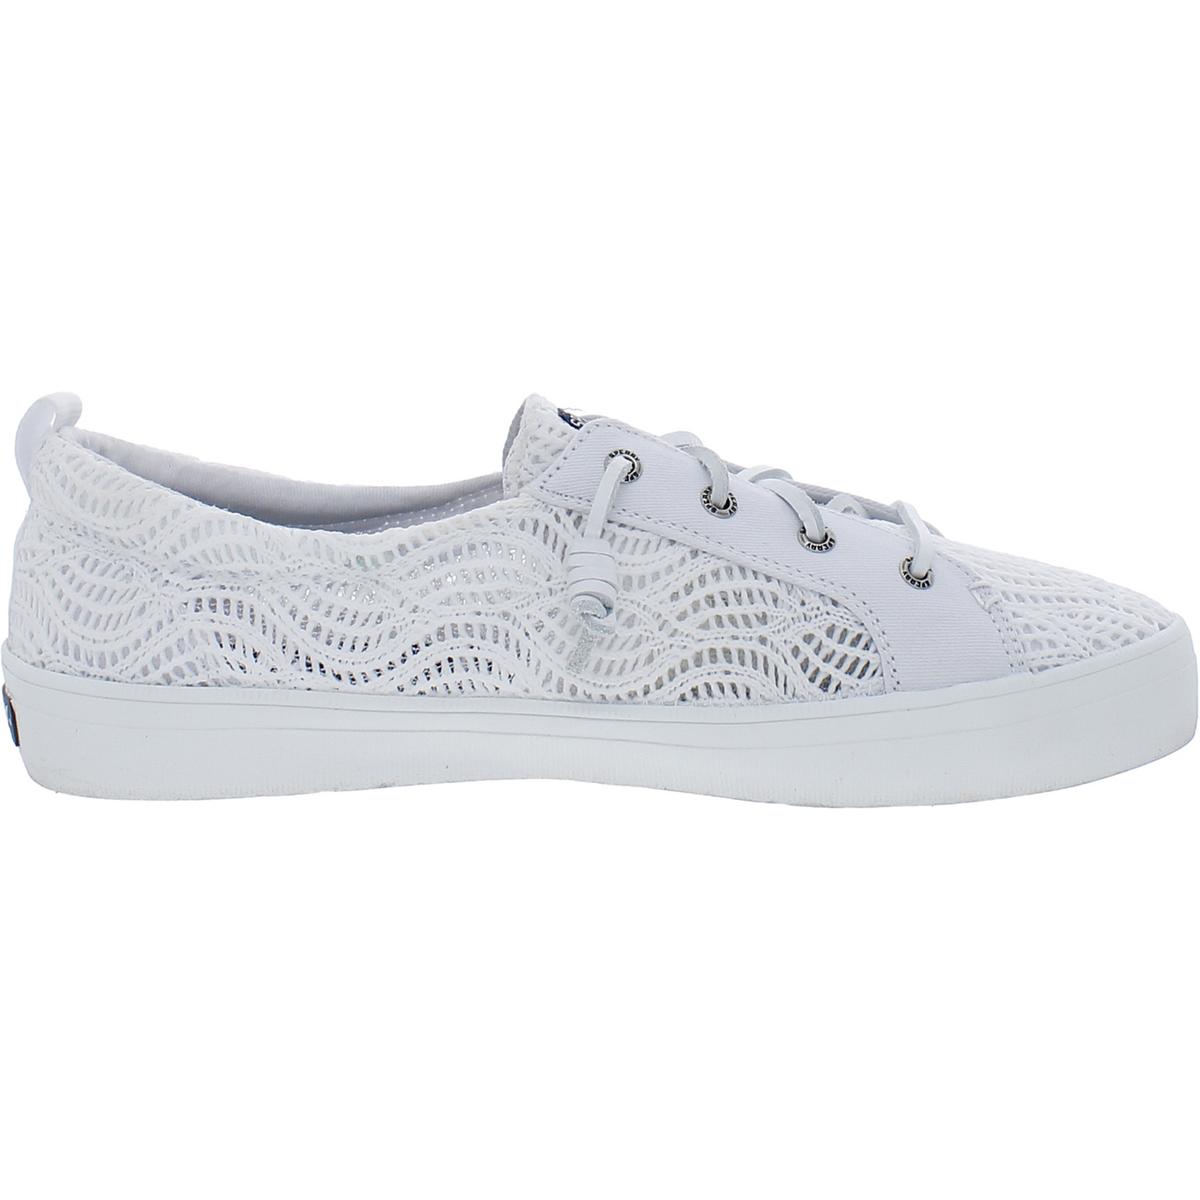 Sperry Crest Womens Round Toe Casual Casual Shoes